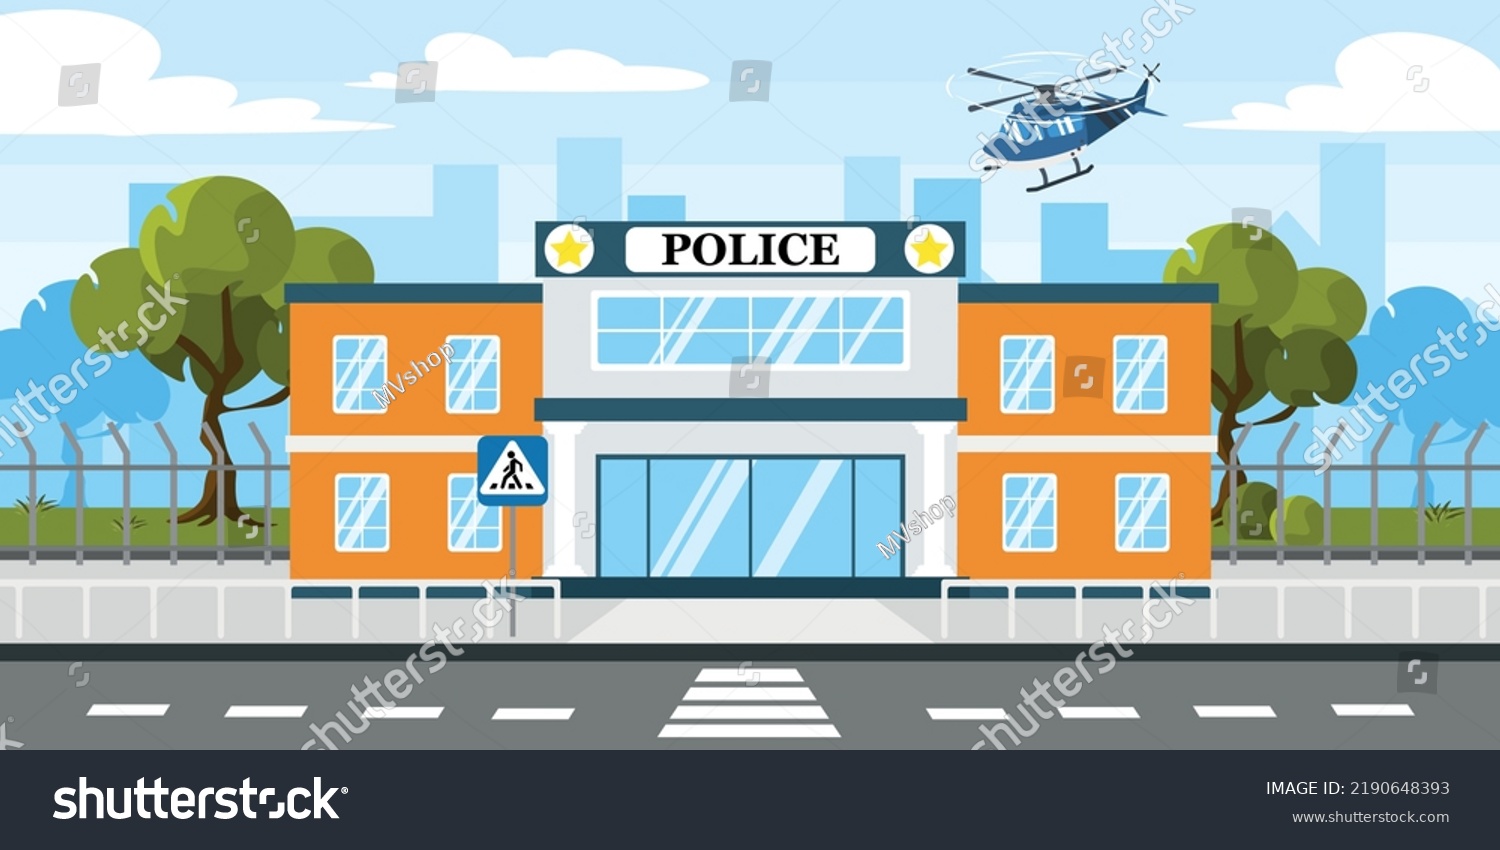 Stock Vector Vector Illustration Of Modern Police Station Cartoon Urban Buildings With Landing Helicopters 2190648393 